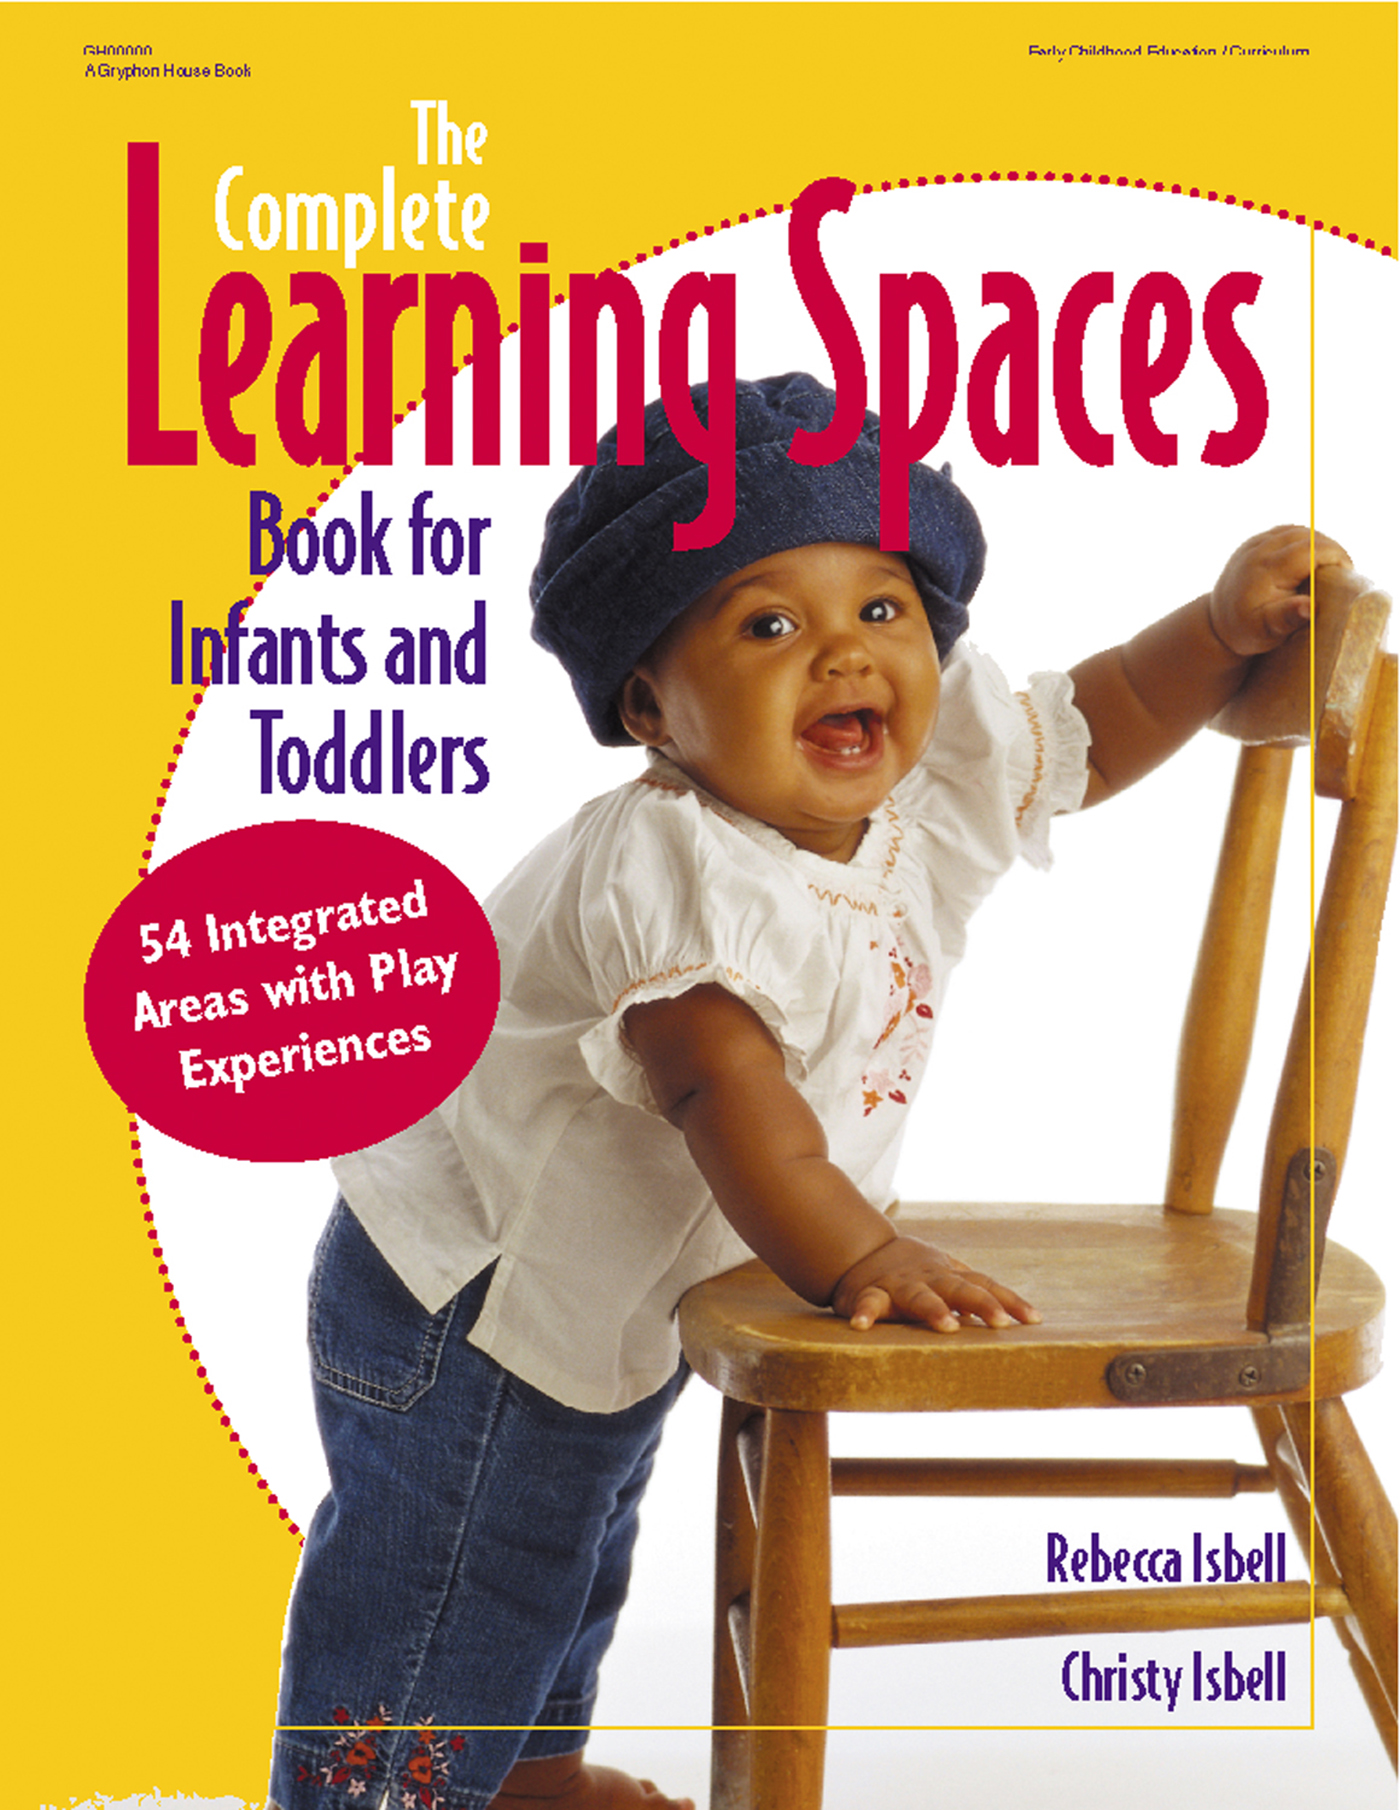 the_complete_learning_spaces_book_for_infants_and_toddlers-cover